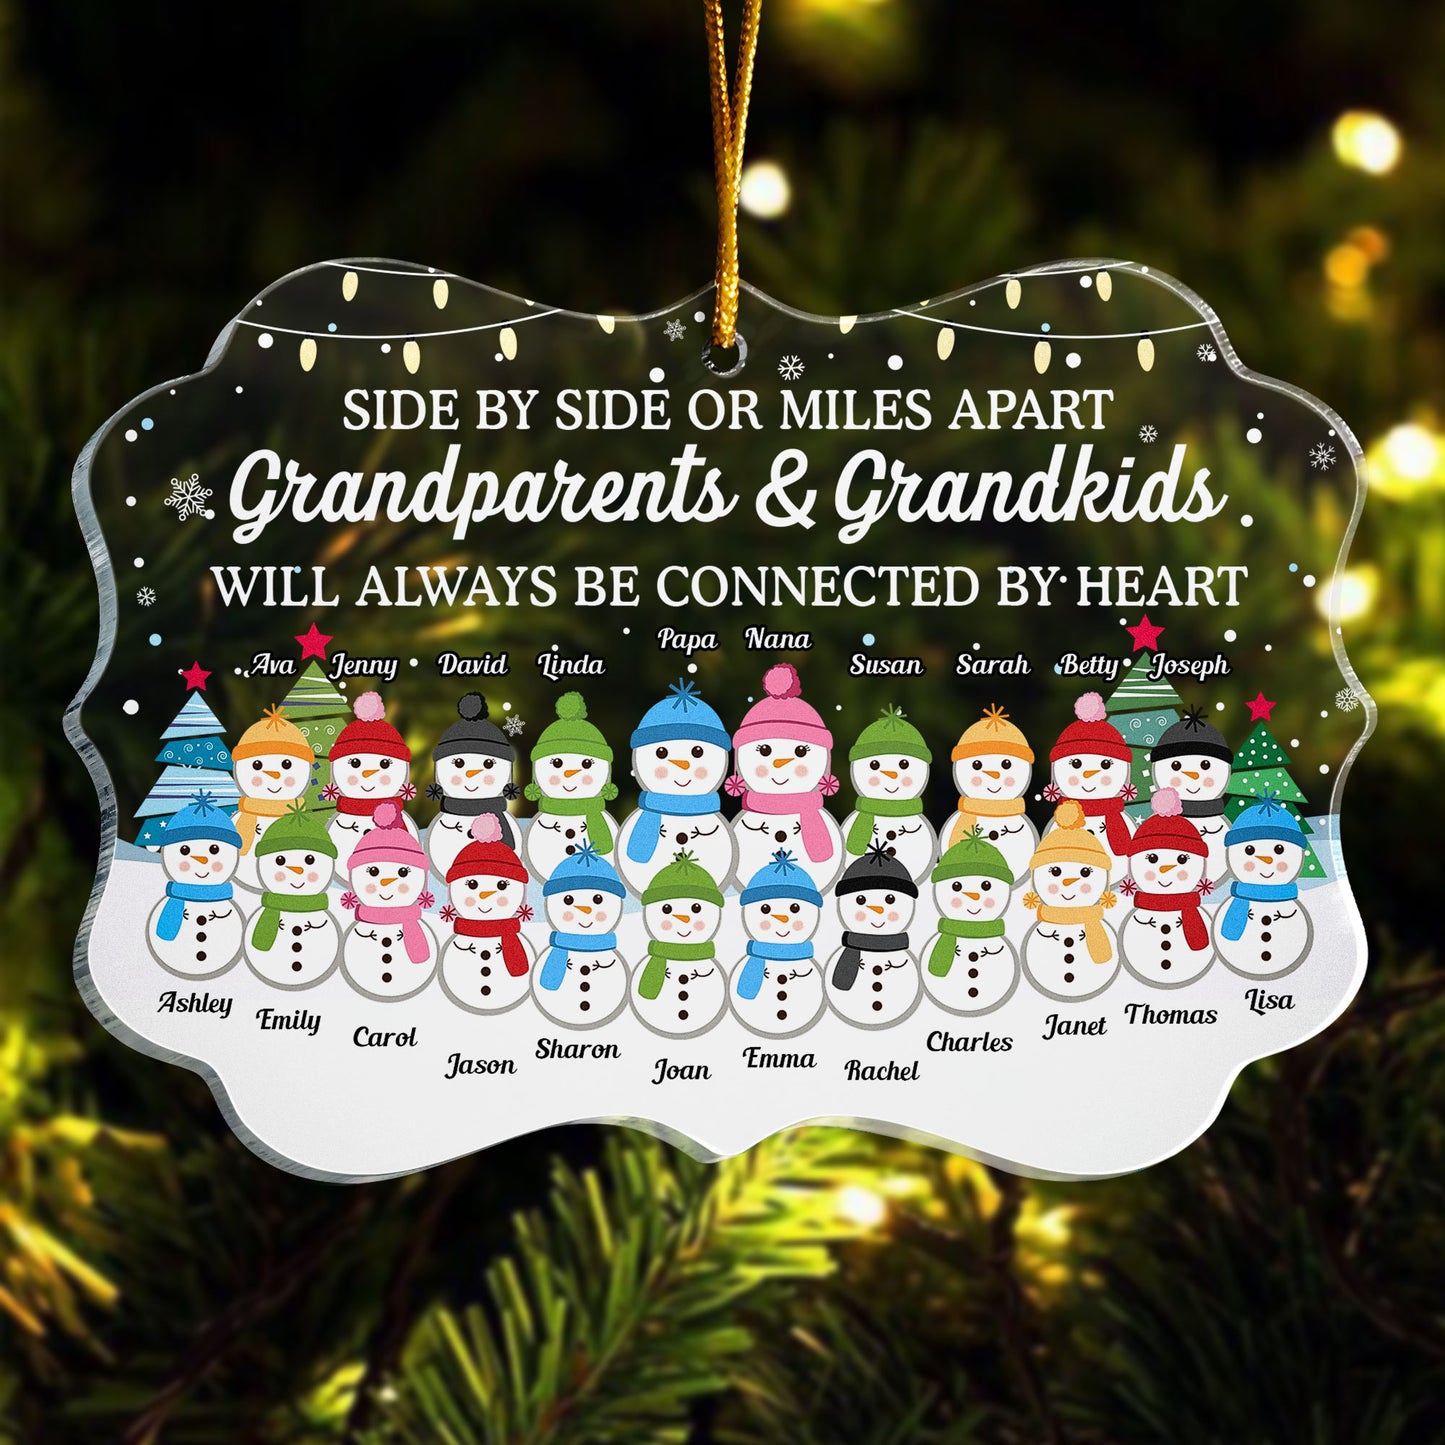 Grandparents & Grandkids - Always Be Connected By Heart - Personalized Acrylic Ornament